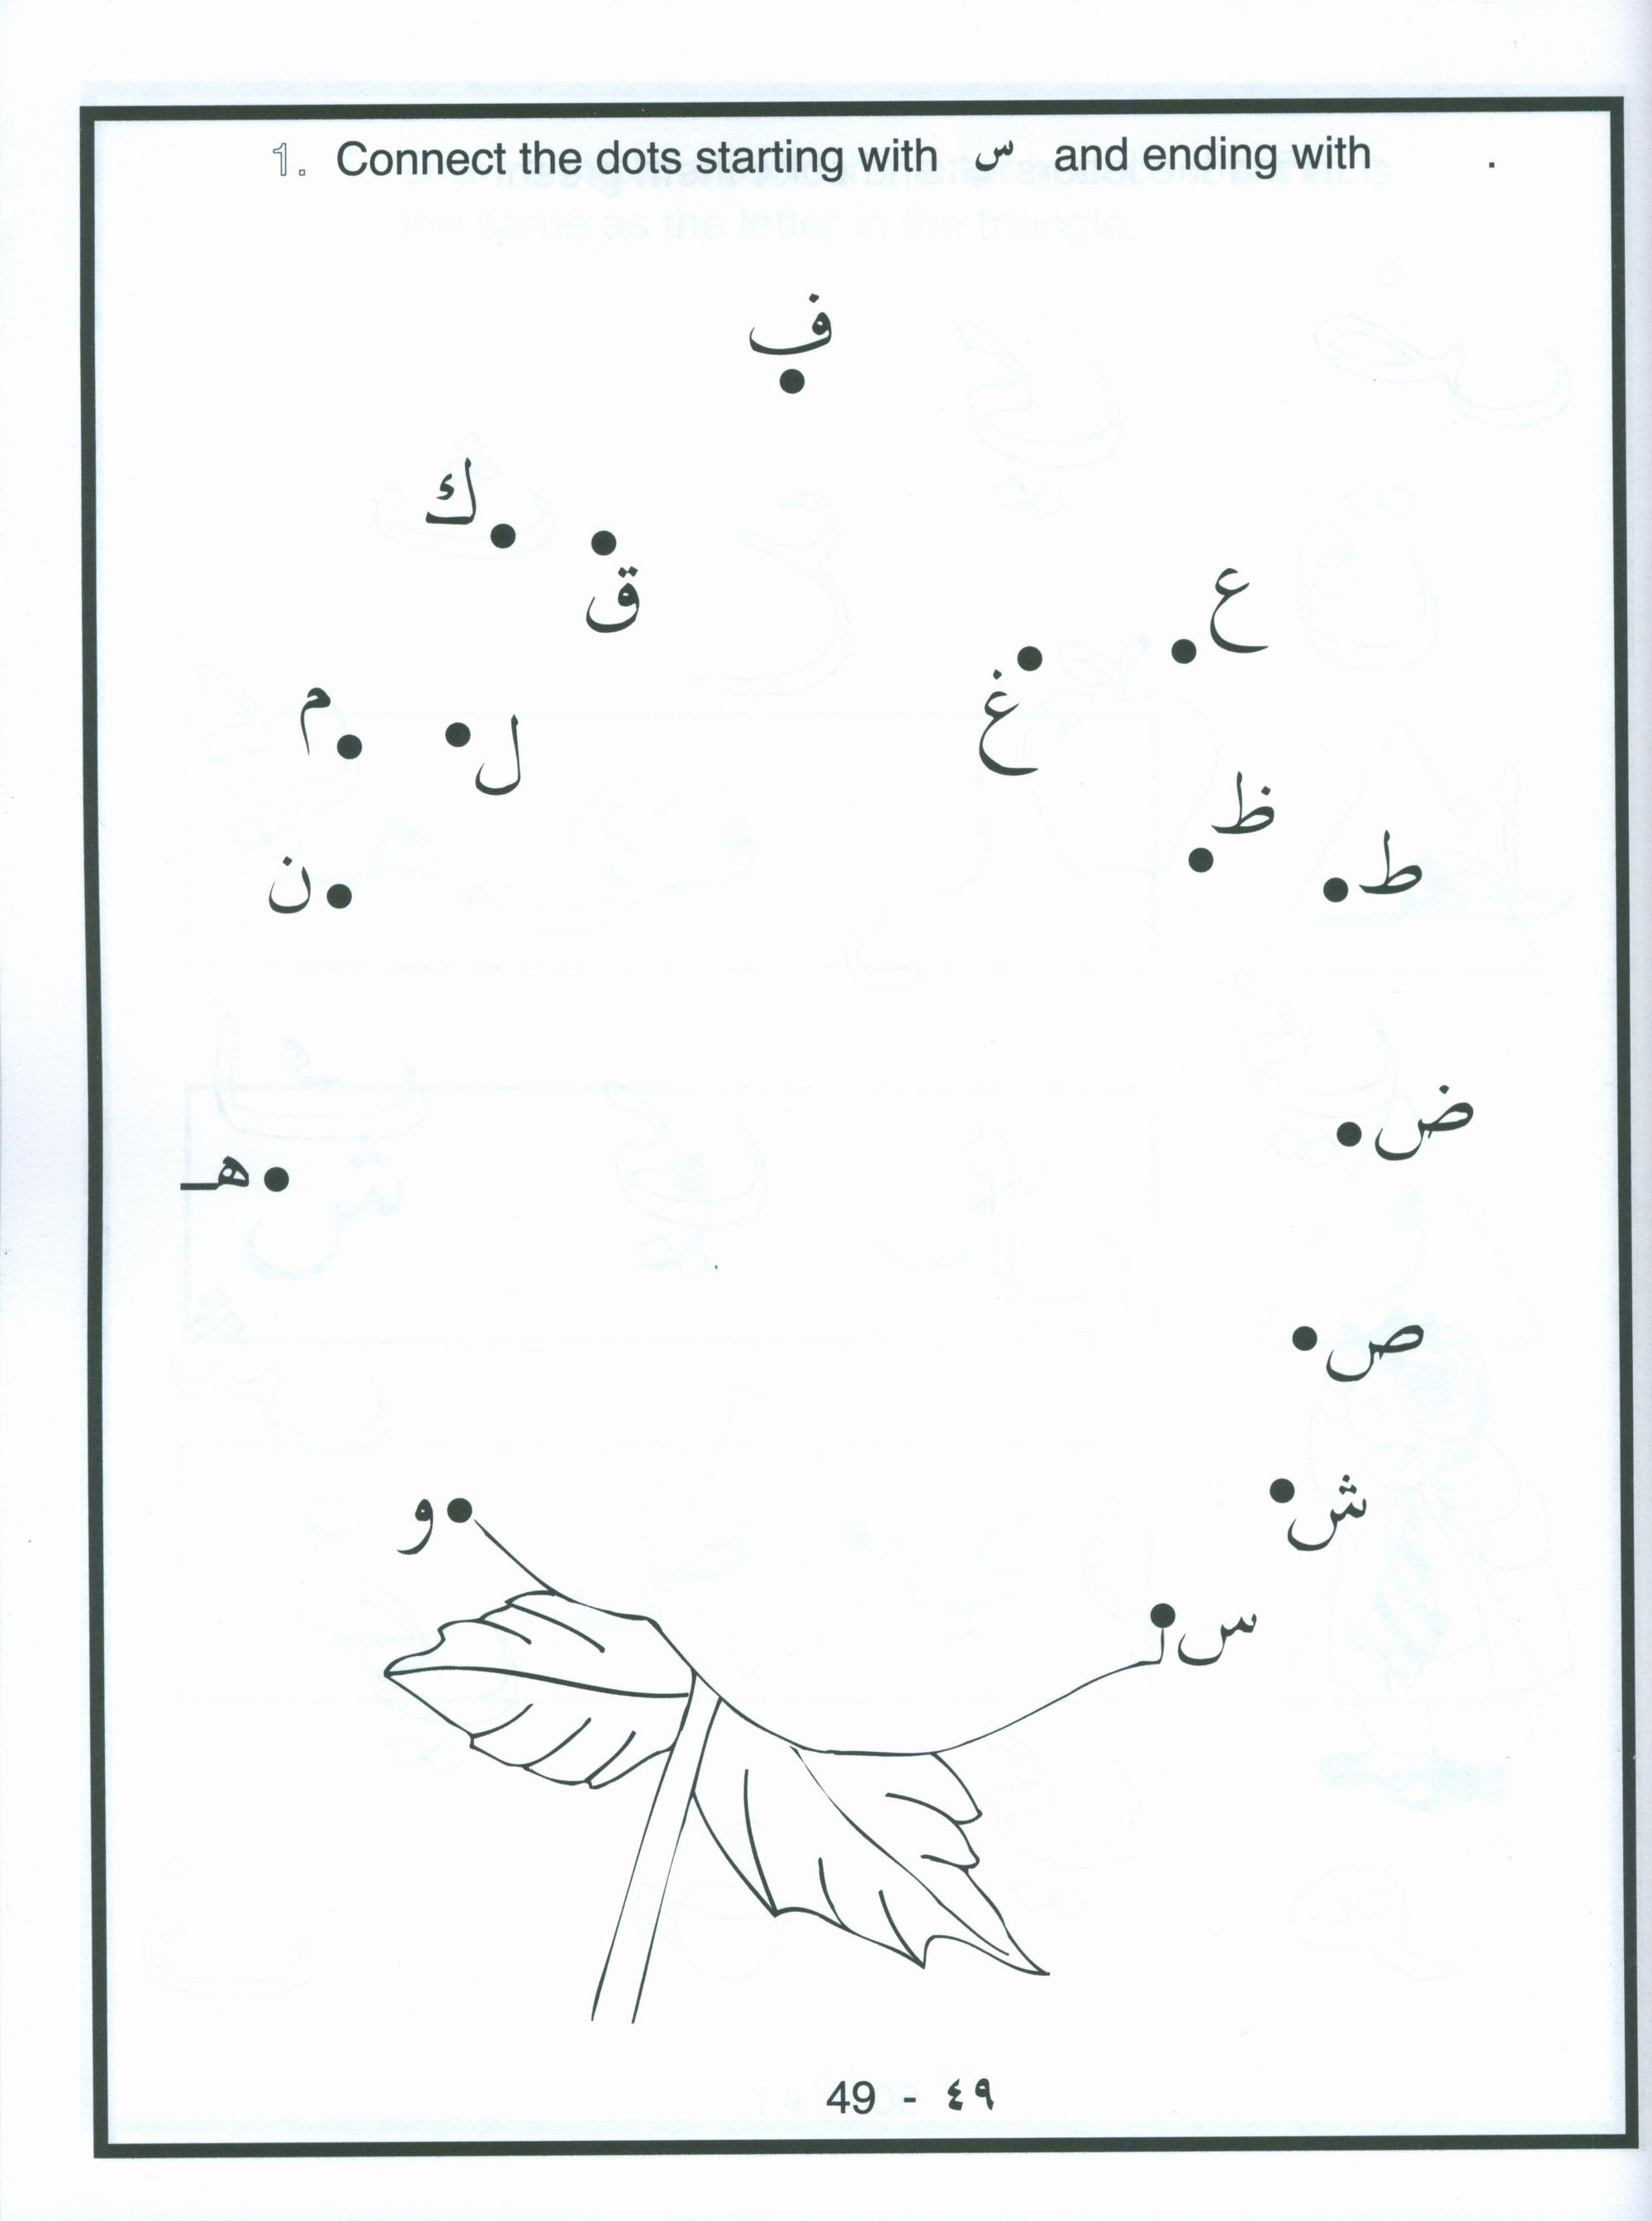 Arabic Letters Activity Book